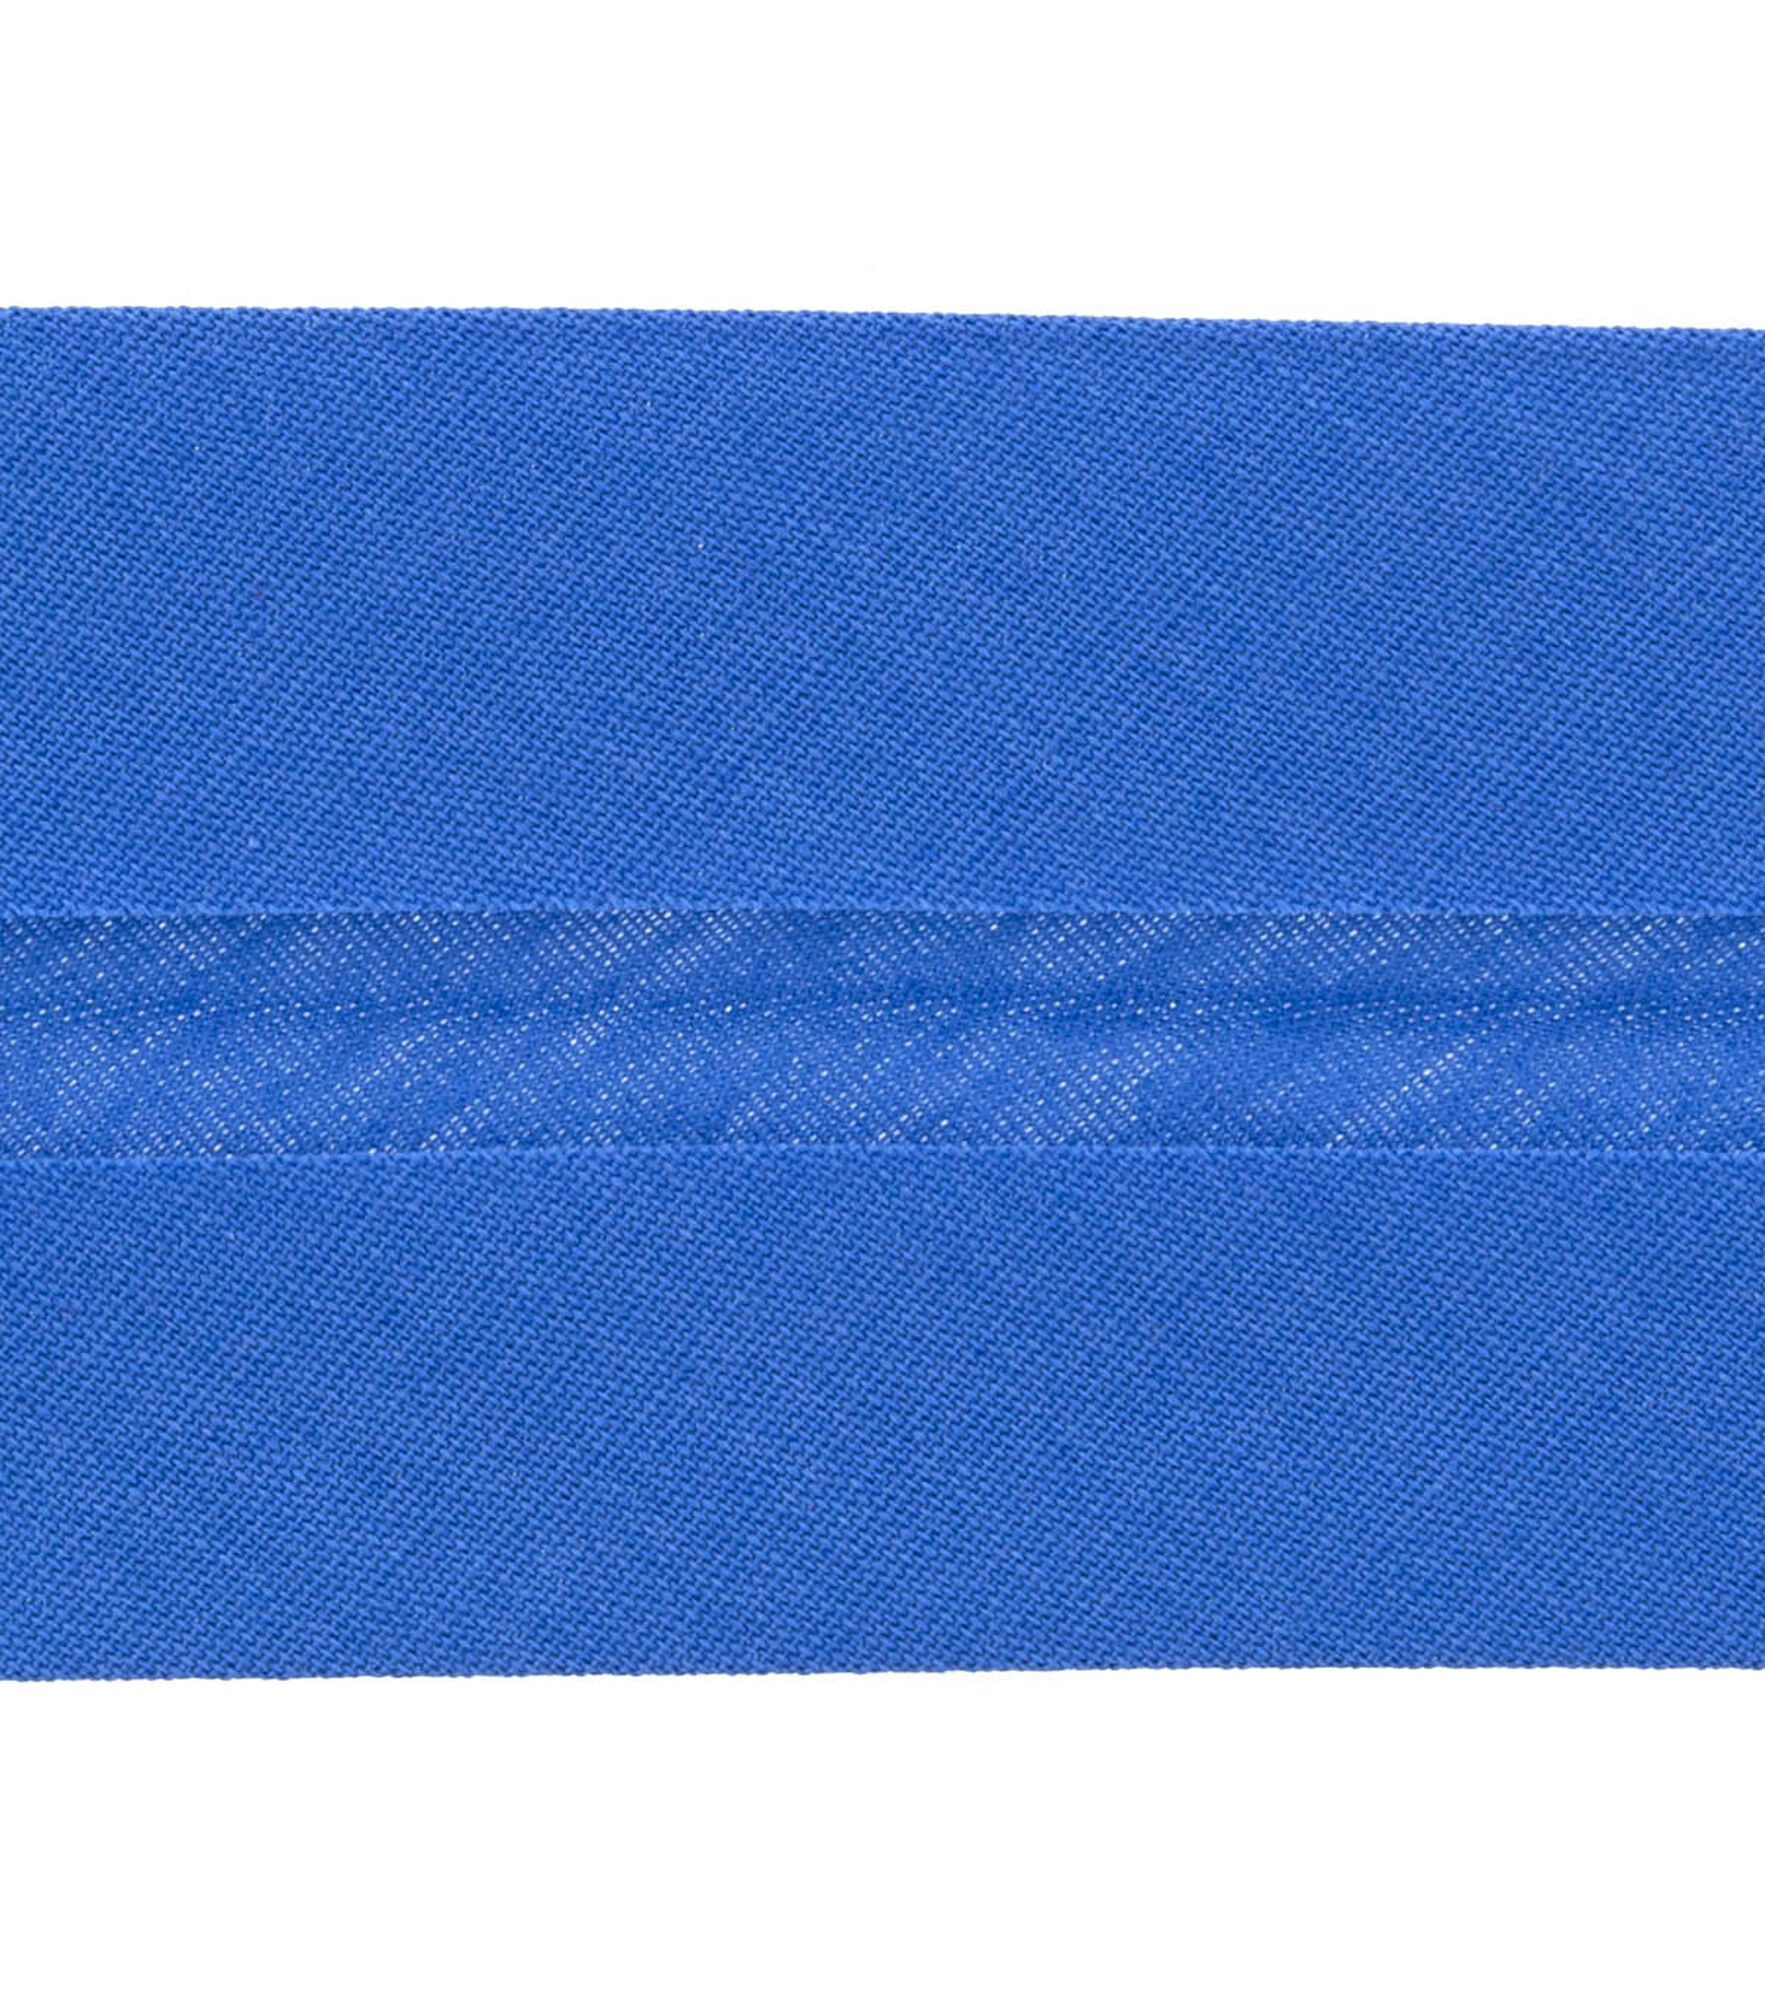 Wrights 7/8" x 3yd Double Fold Quilt Binding, Royal, hi-res